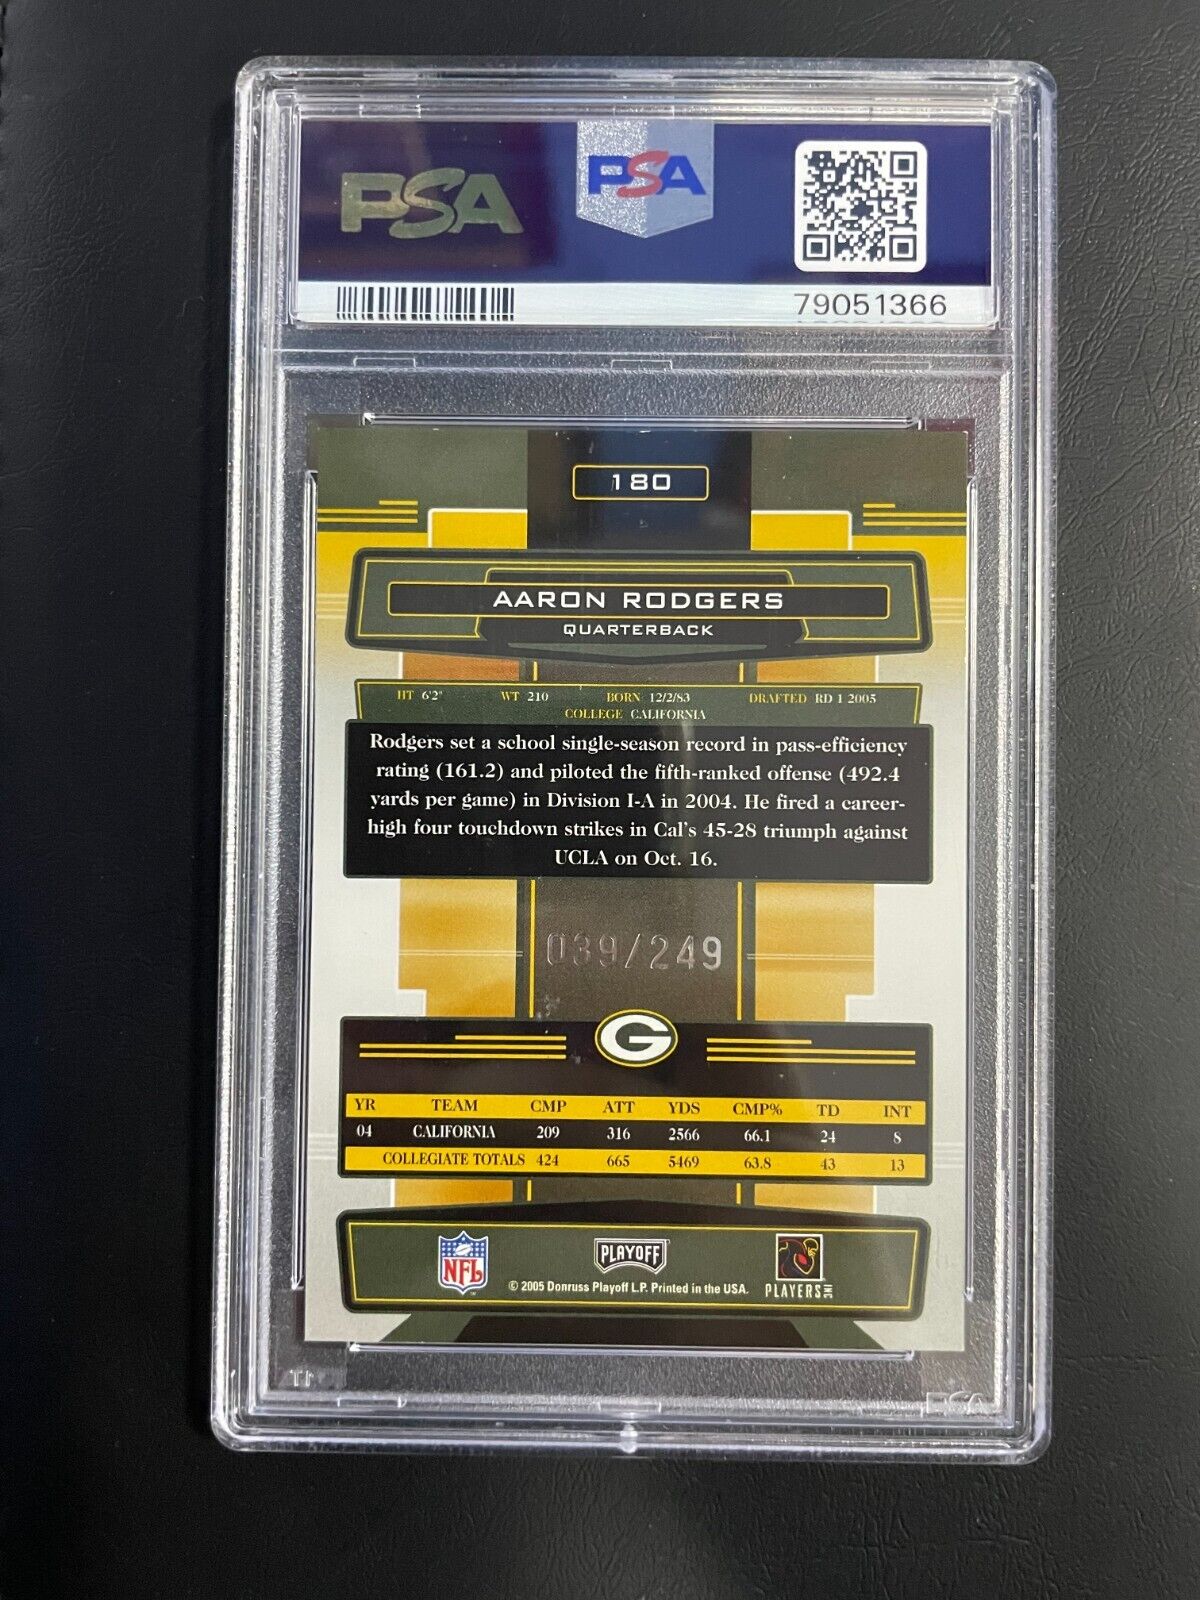 2005 Playoff Absolute Mem Aaron Rodgers Spectrum Silver RC Auto PSA 8 /249